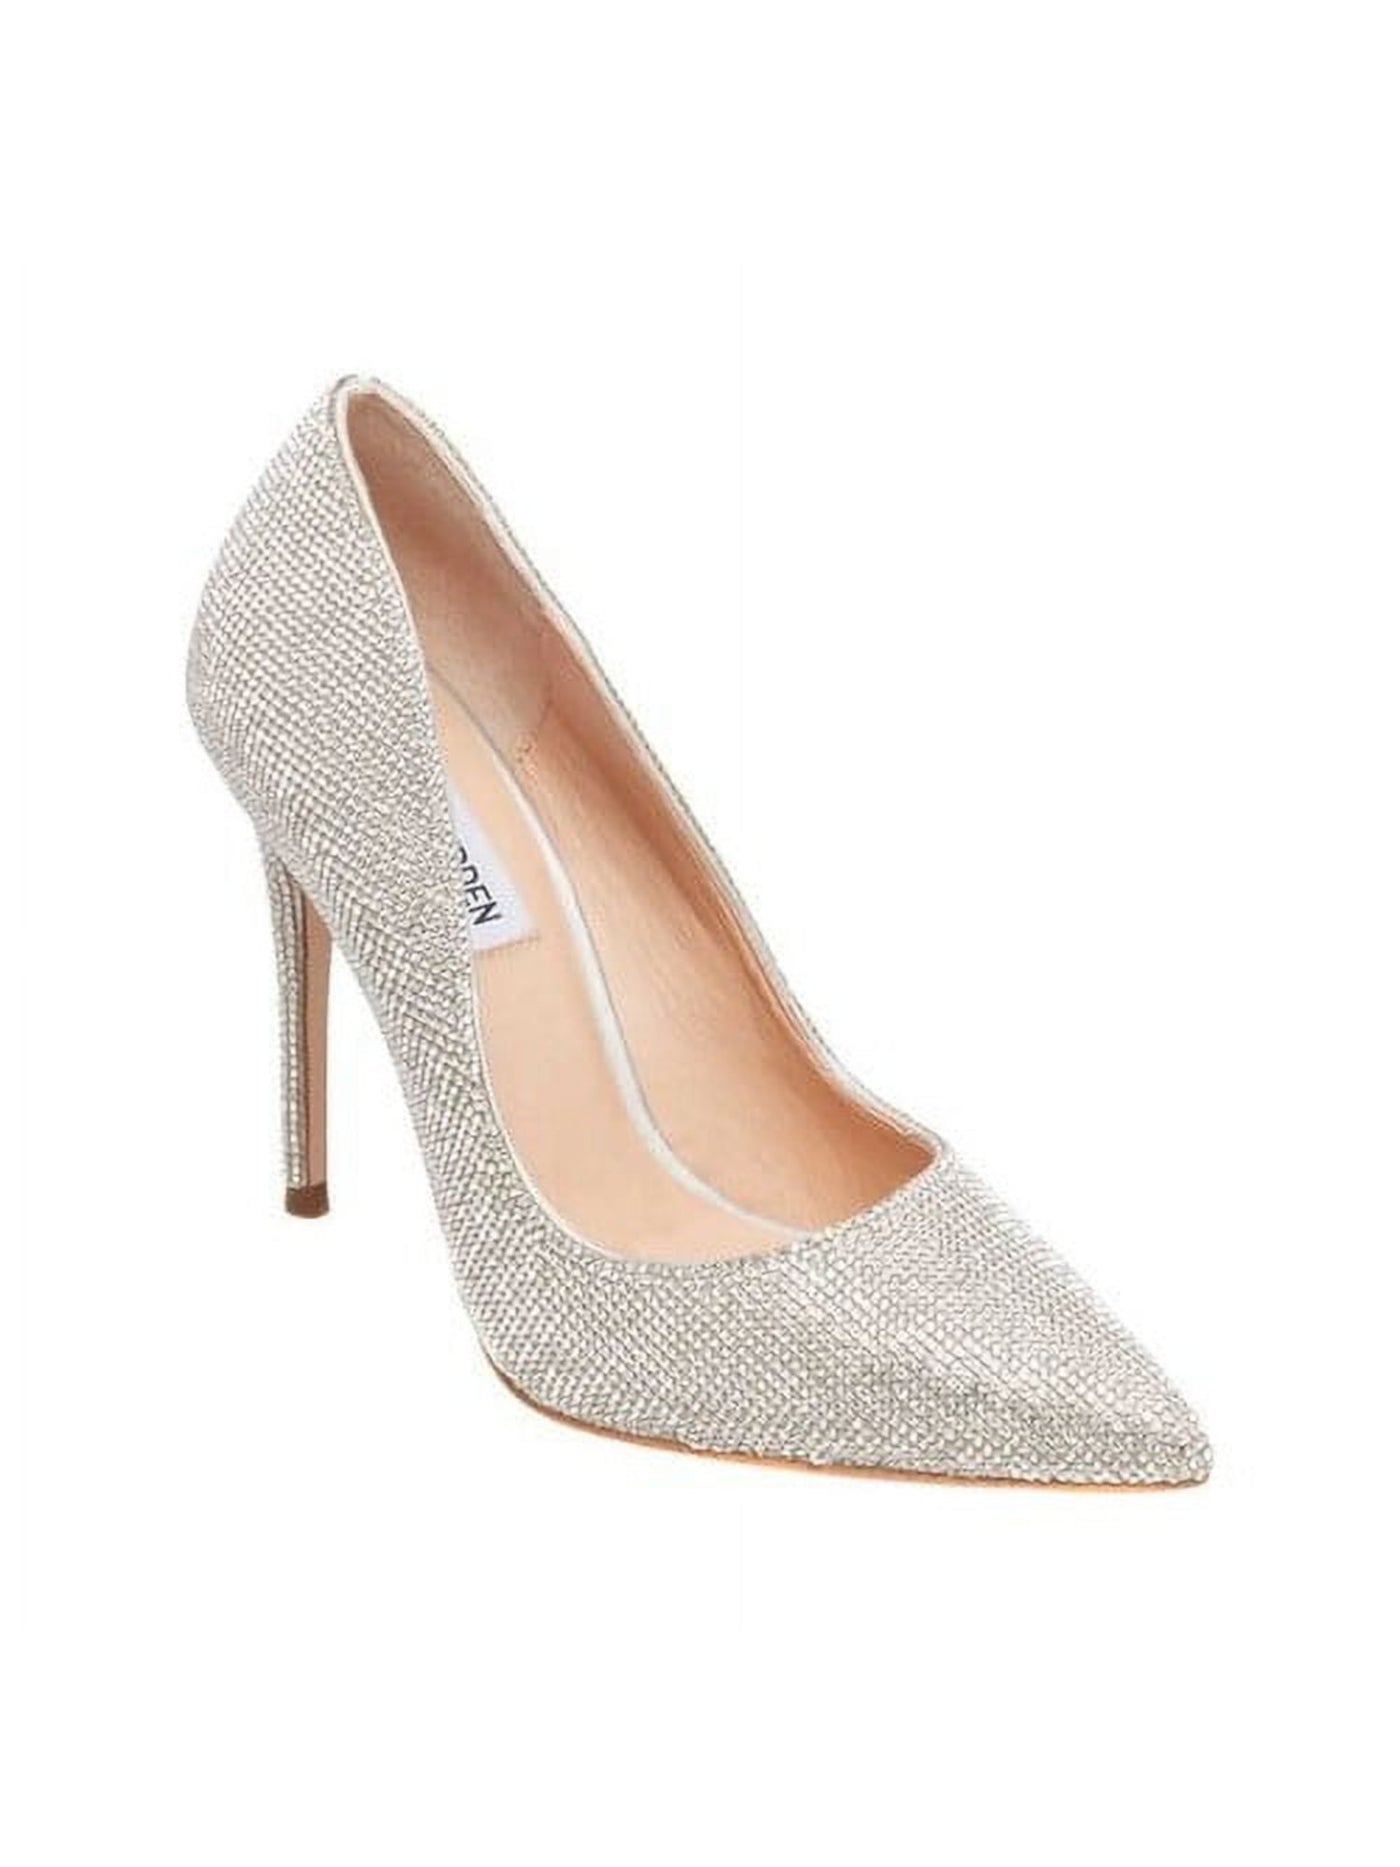 STEVE MADDEN Womens Silver Rhinestone Cushioned Daisie Pointed Toe Stiletto Slip On Dress Pumps Shoes 6.5 M